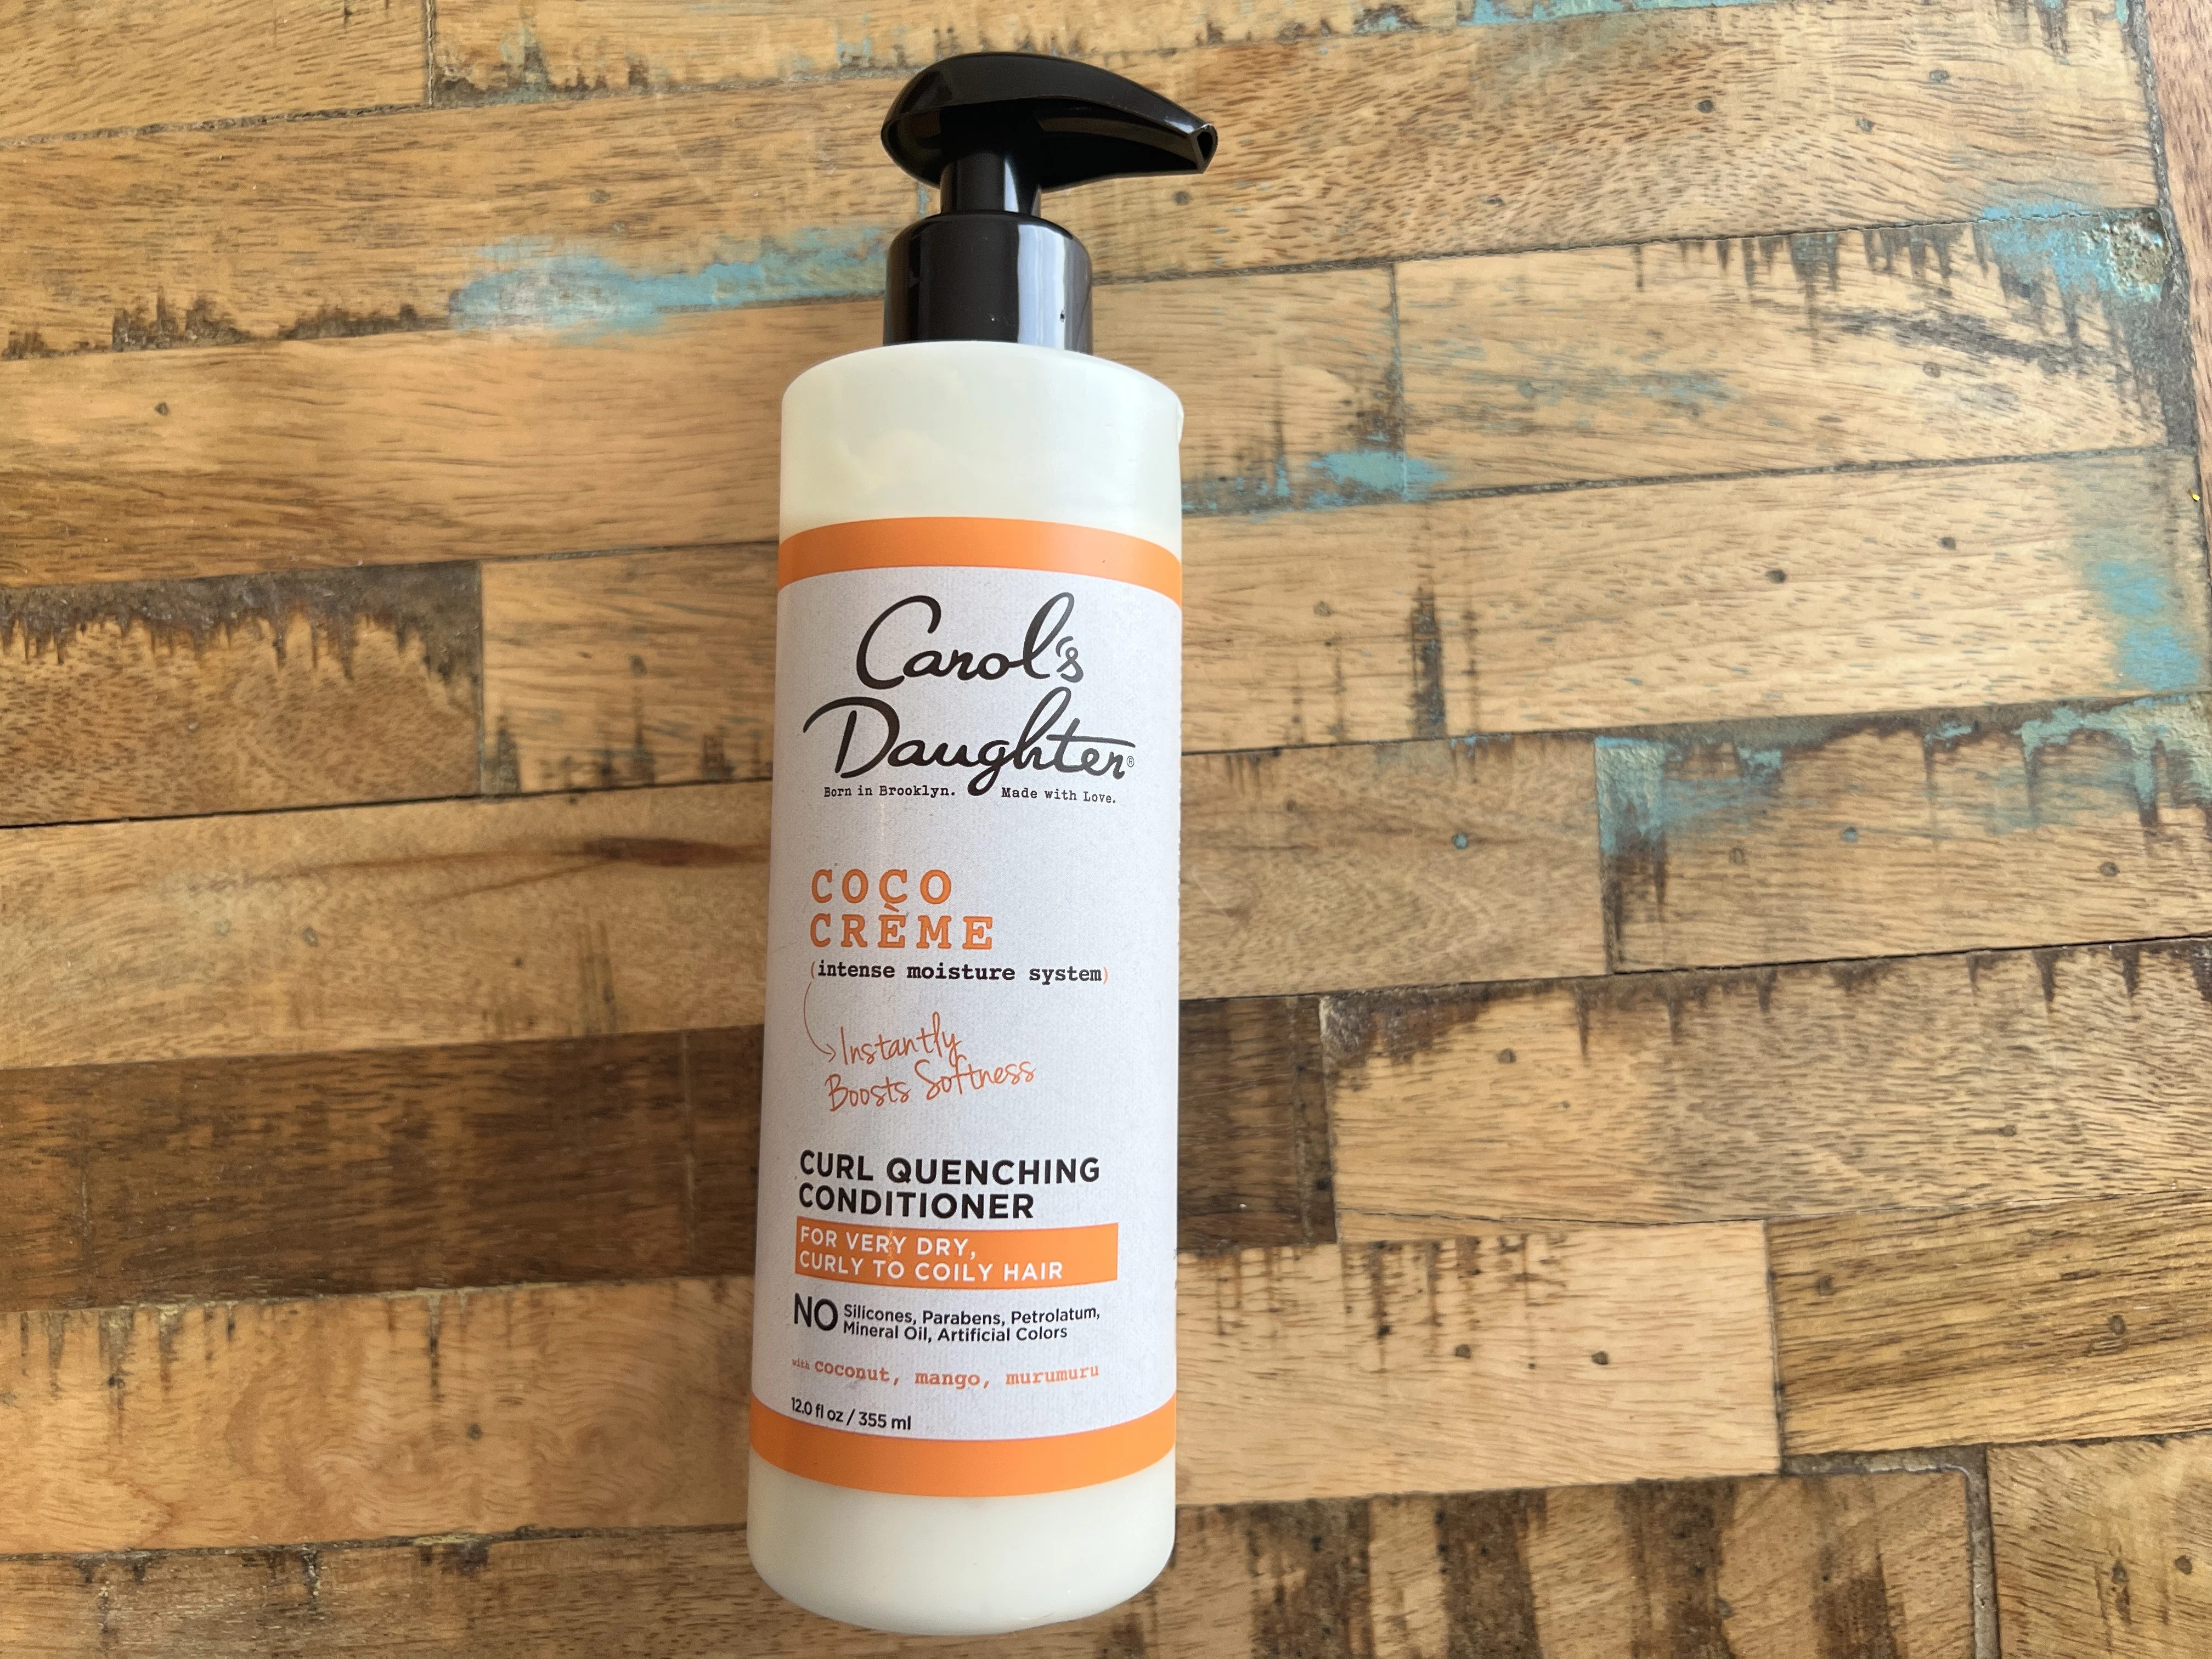 Carol's Daughter, Coco Créme intense moisture system instantly boosts softness with its curly quenching conditioner for very dry, curly to coily hair strands. The doesn't include any silicones, parabens, petrolatum, mineral oil, or artificial colors.